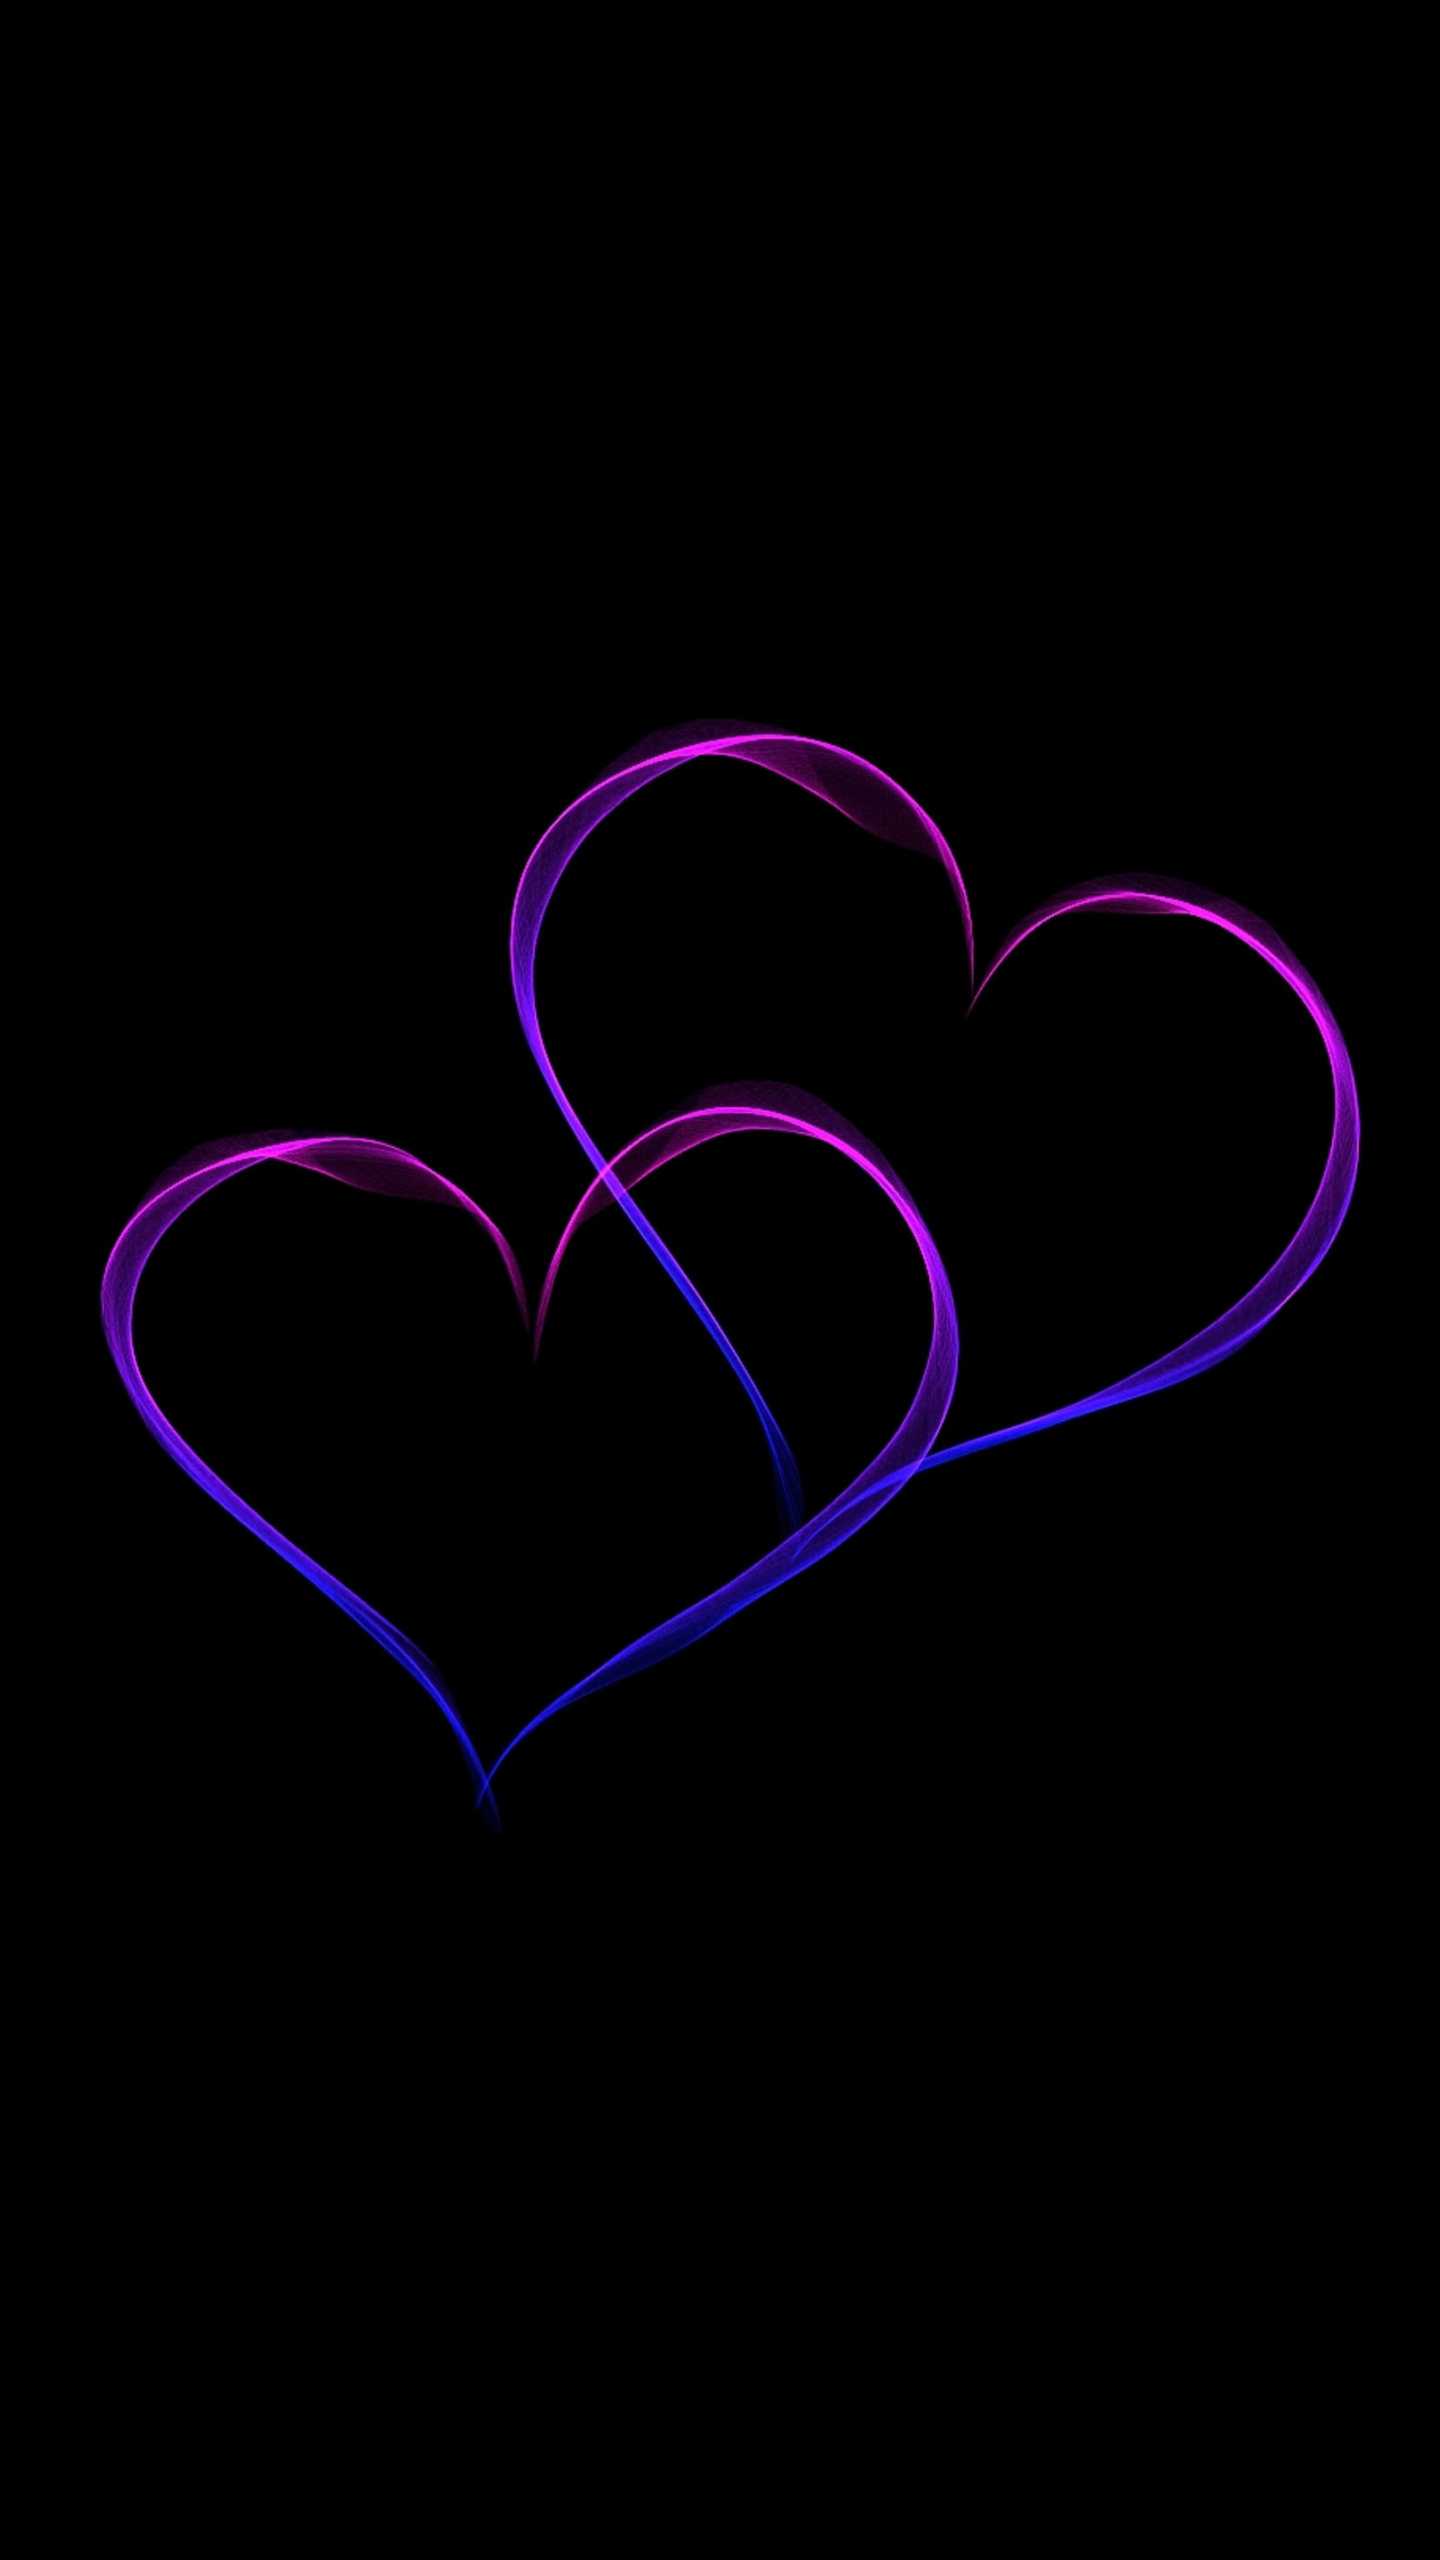 Black background with two purple hearts that are connected - Heart